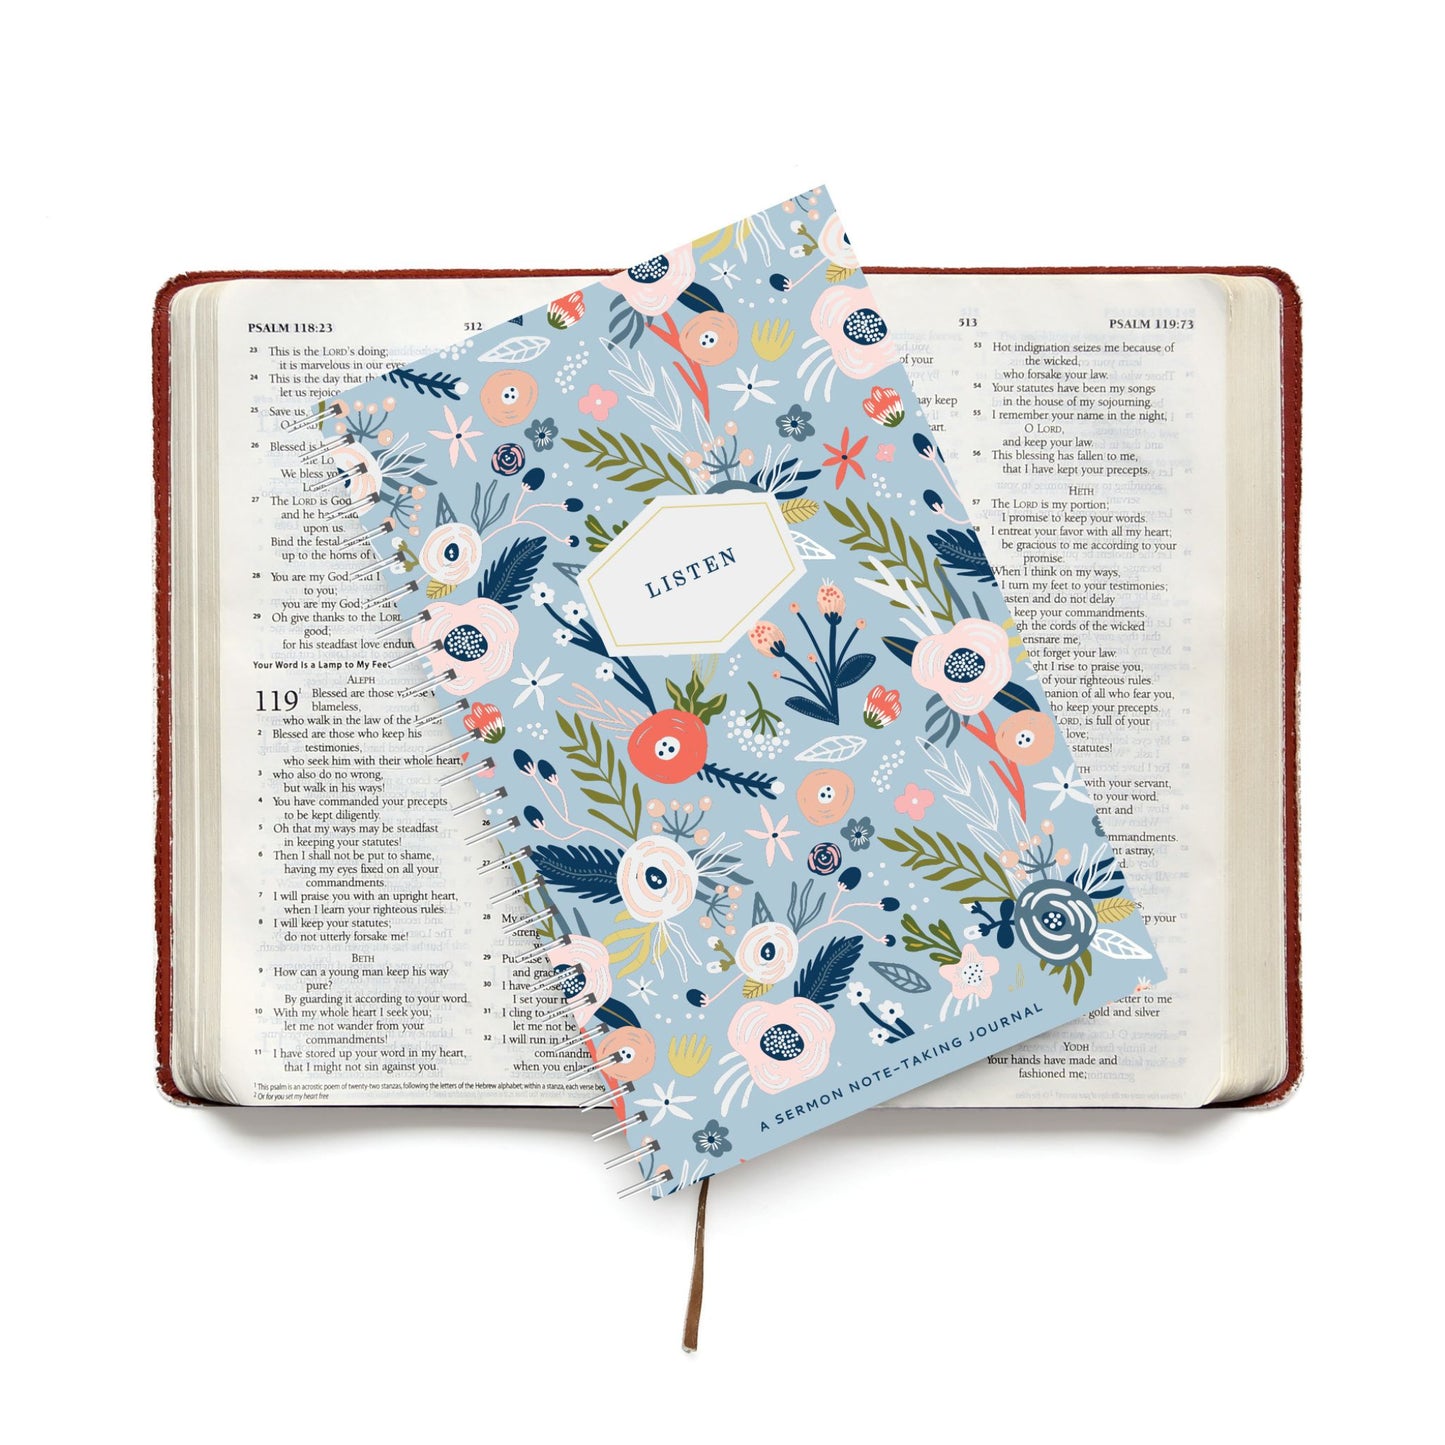 The ultimate tool for deepening your connection to the word of God: The Sermon Notes Journal.